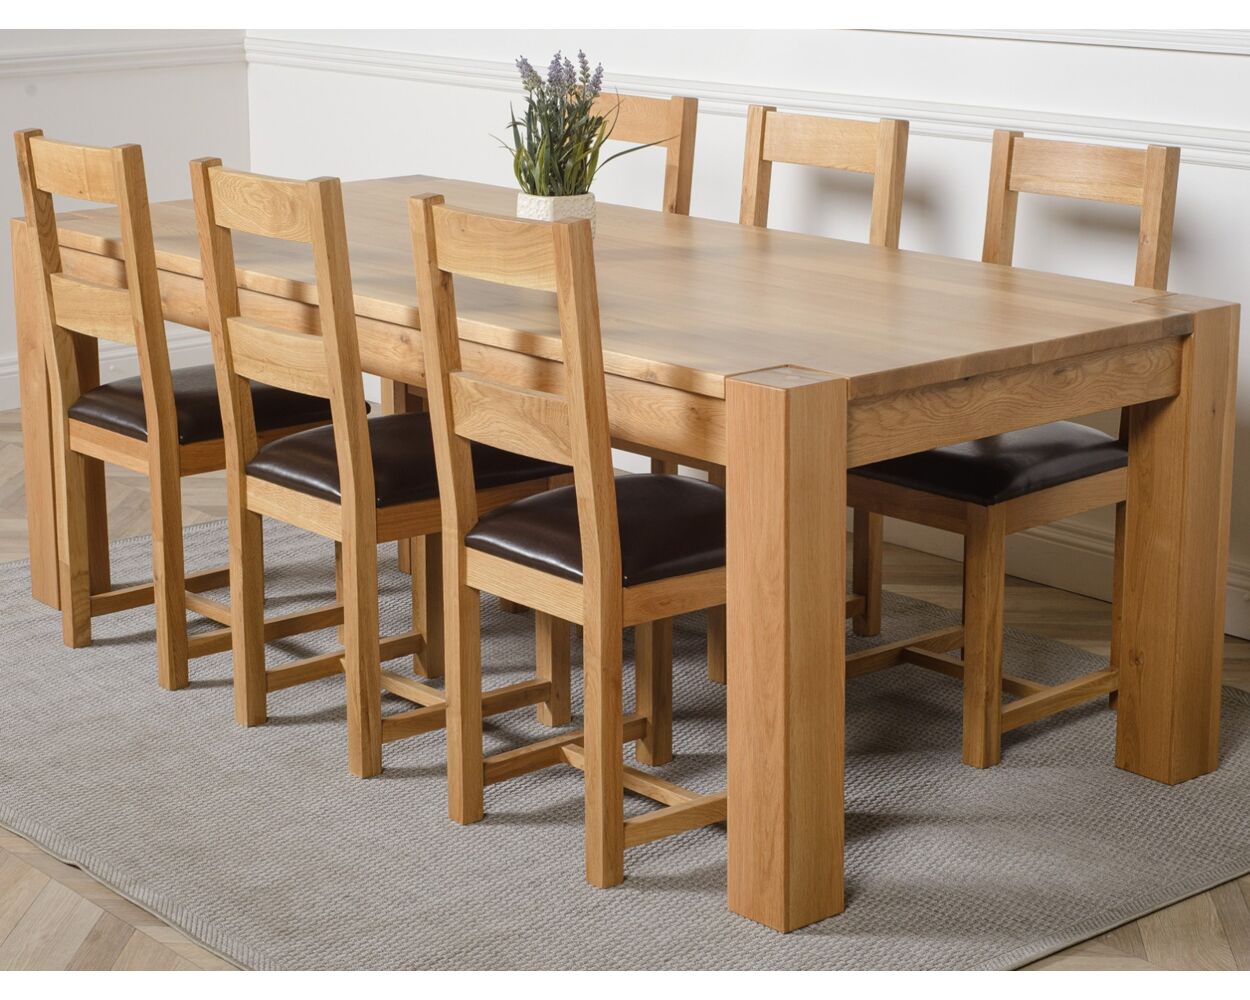 https://www.thatsfurniture.co.uk/media/catalog/product/cache/79d0c862bdeeda8182459d35d8e05bcd/k/u/kuba-extra-large-oak-dining-table-with-6-lincoln-oak-chairs-brown-leather_1.jpg